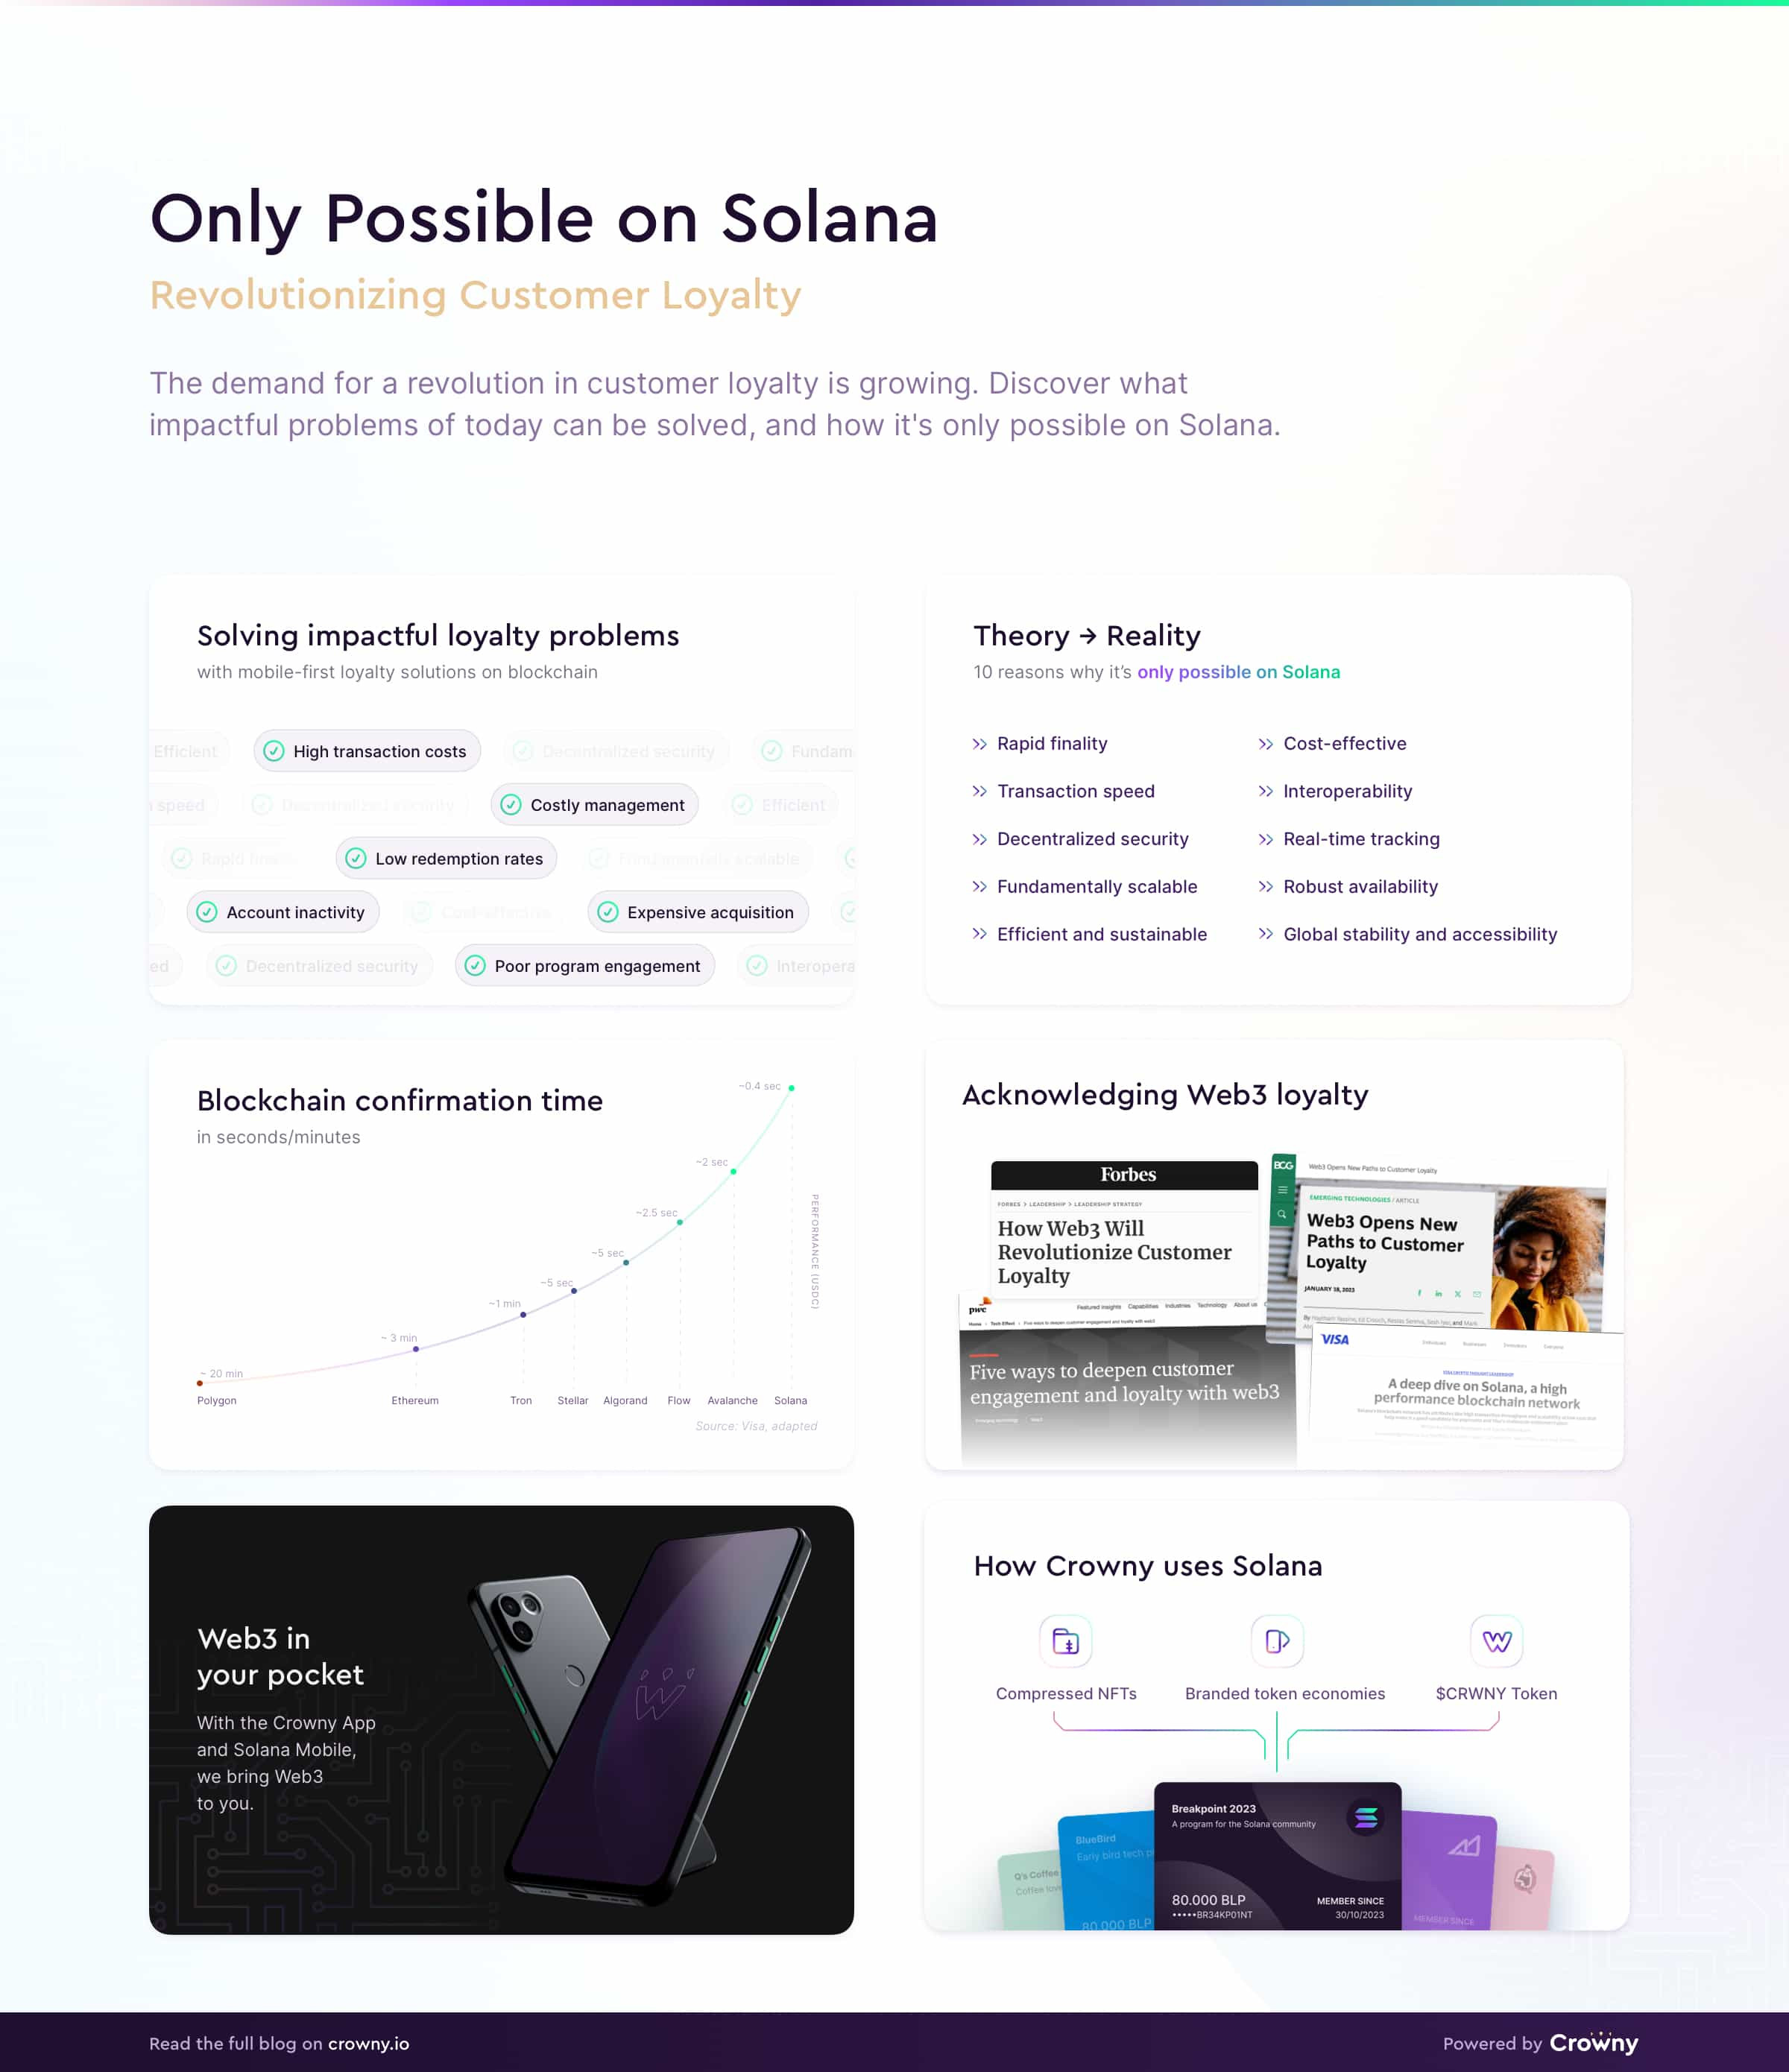 Why revolutioninzing customer loyalty is Only Possible On Solana infographic